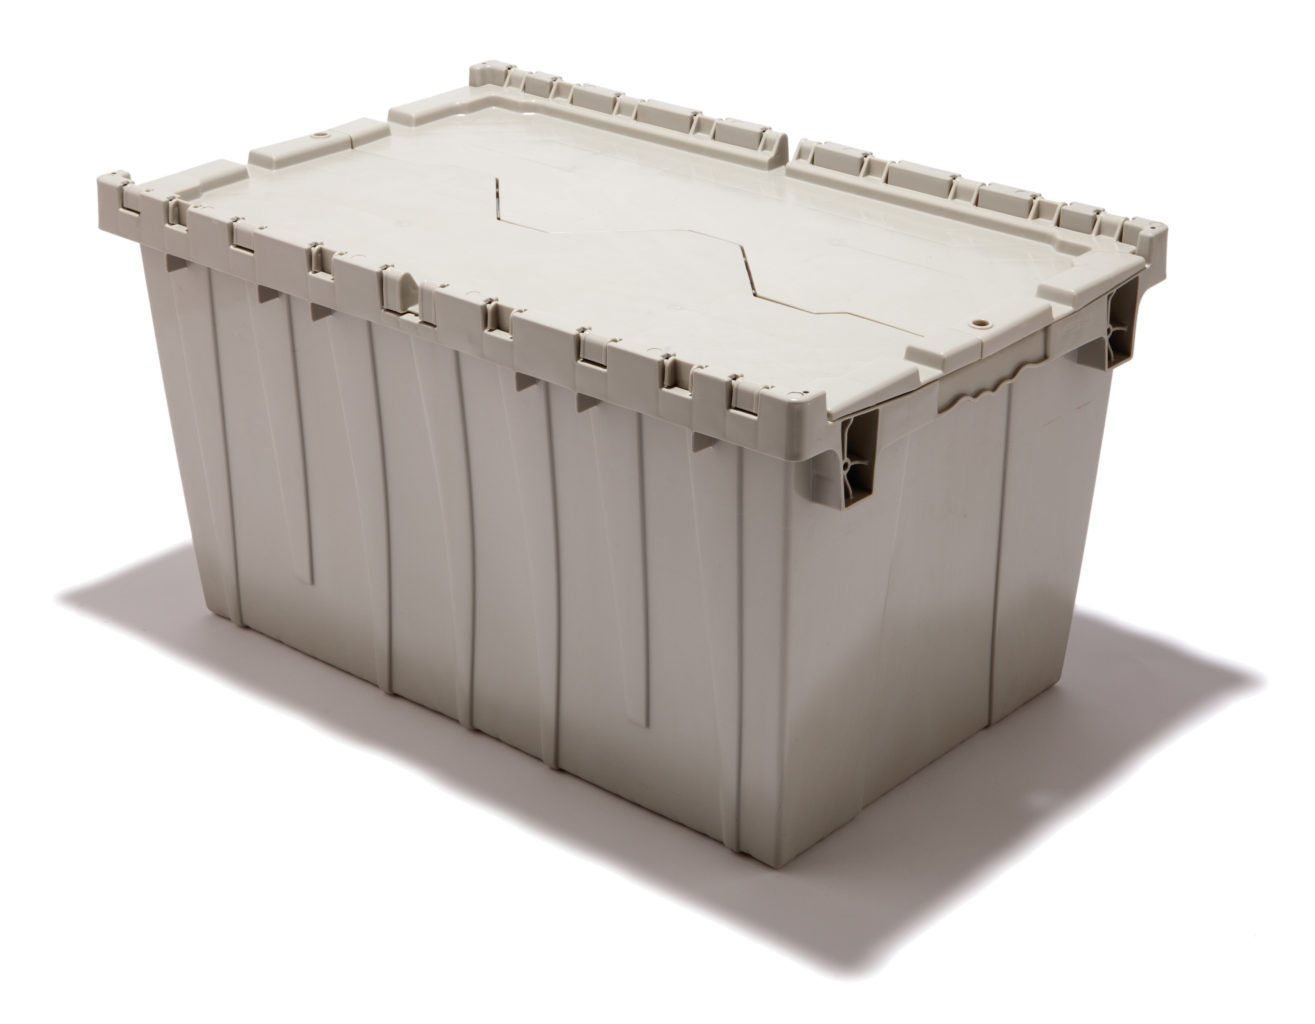 24 x 20 x 12 – Handheld Attached Lid Container